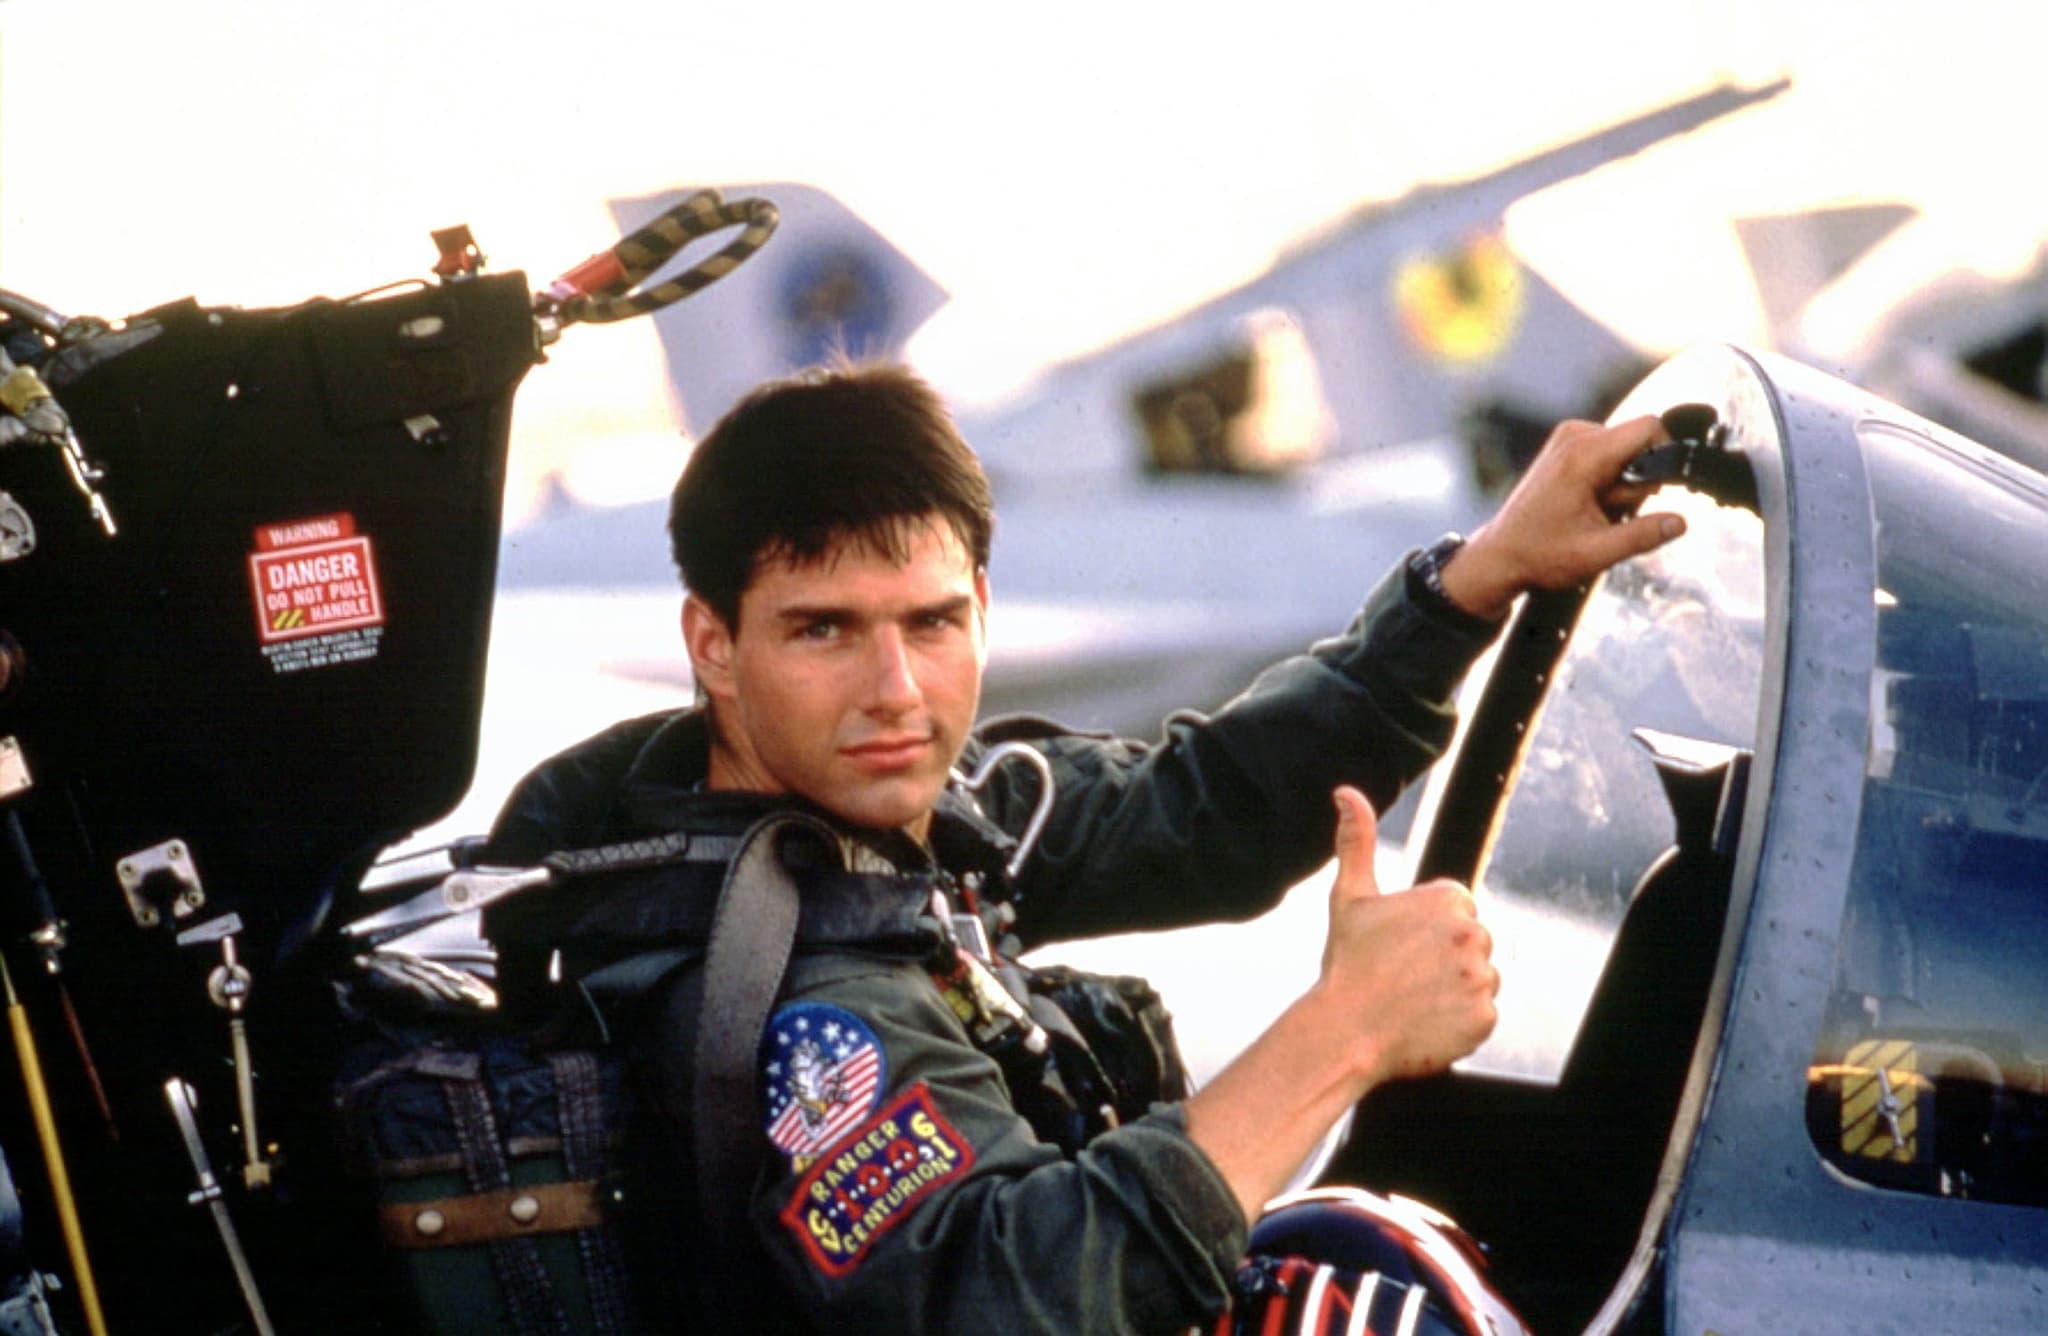 One of Tom Cruise's most iconic film roles is Top Gun's Pete "Maverick" Mitchell